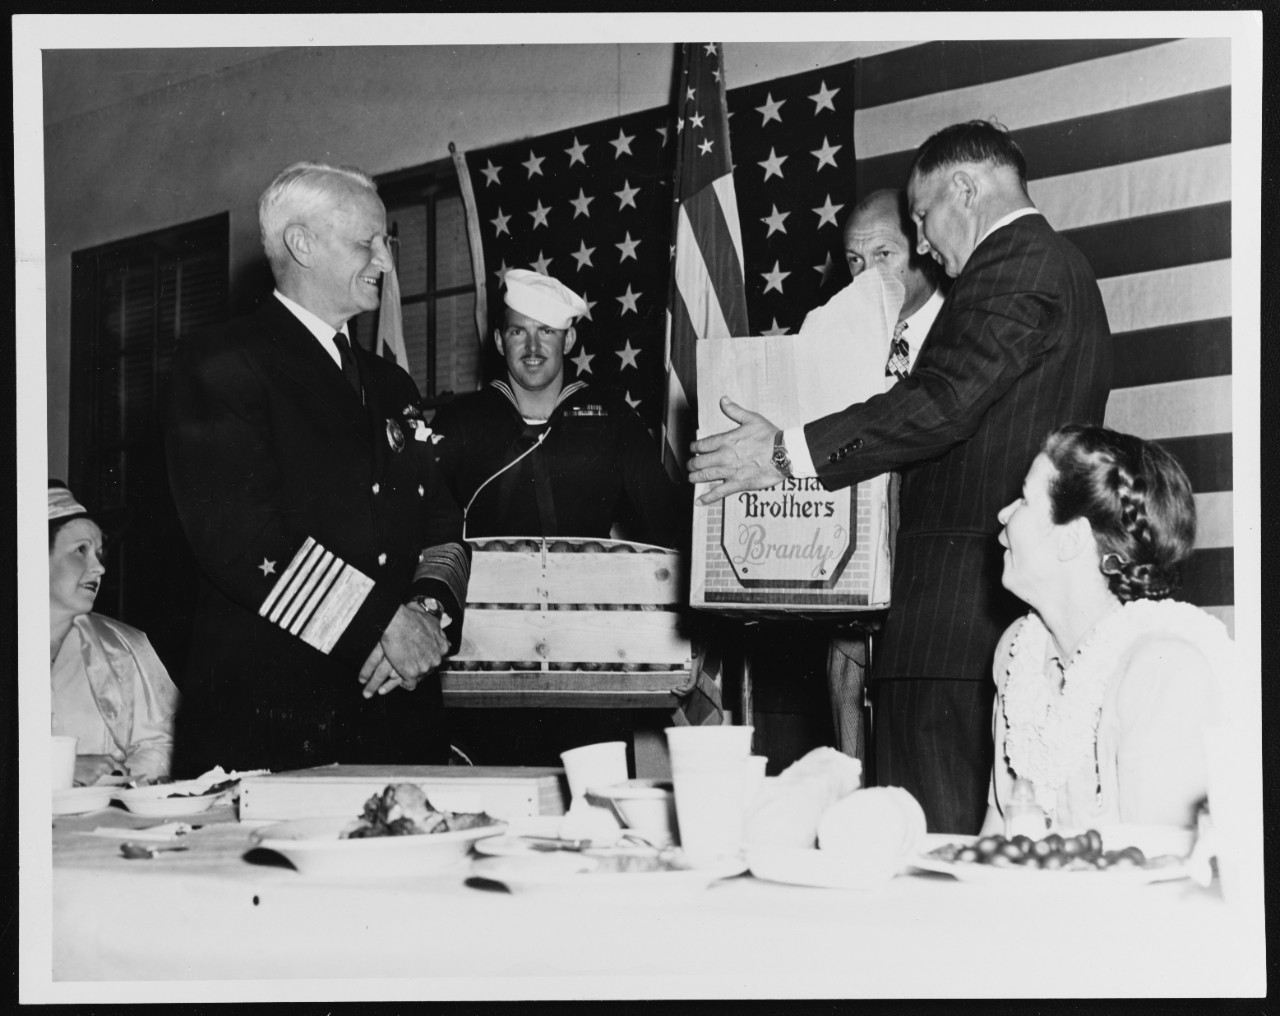 Fleet Admiral Nimitz is Presented with Crates of Fruits and Vegetables